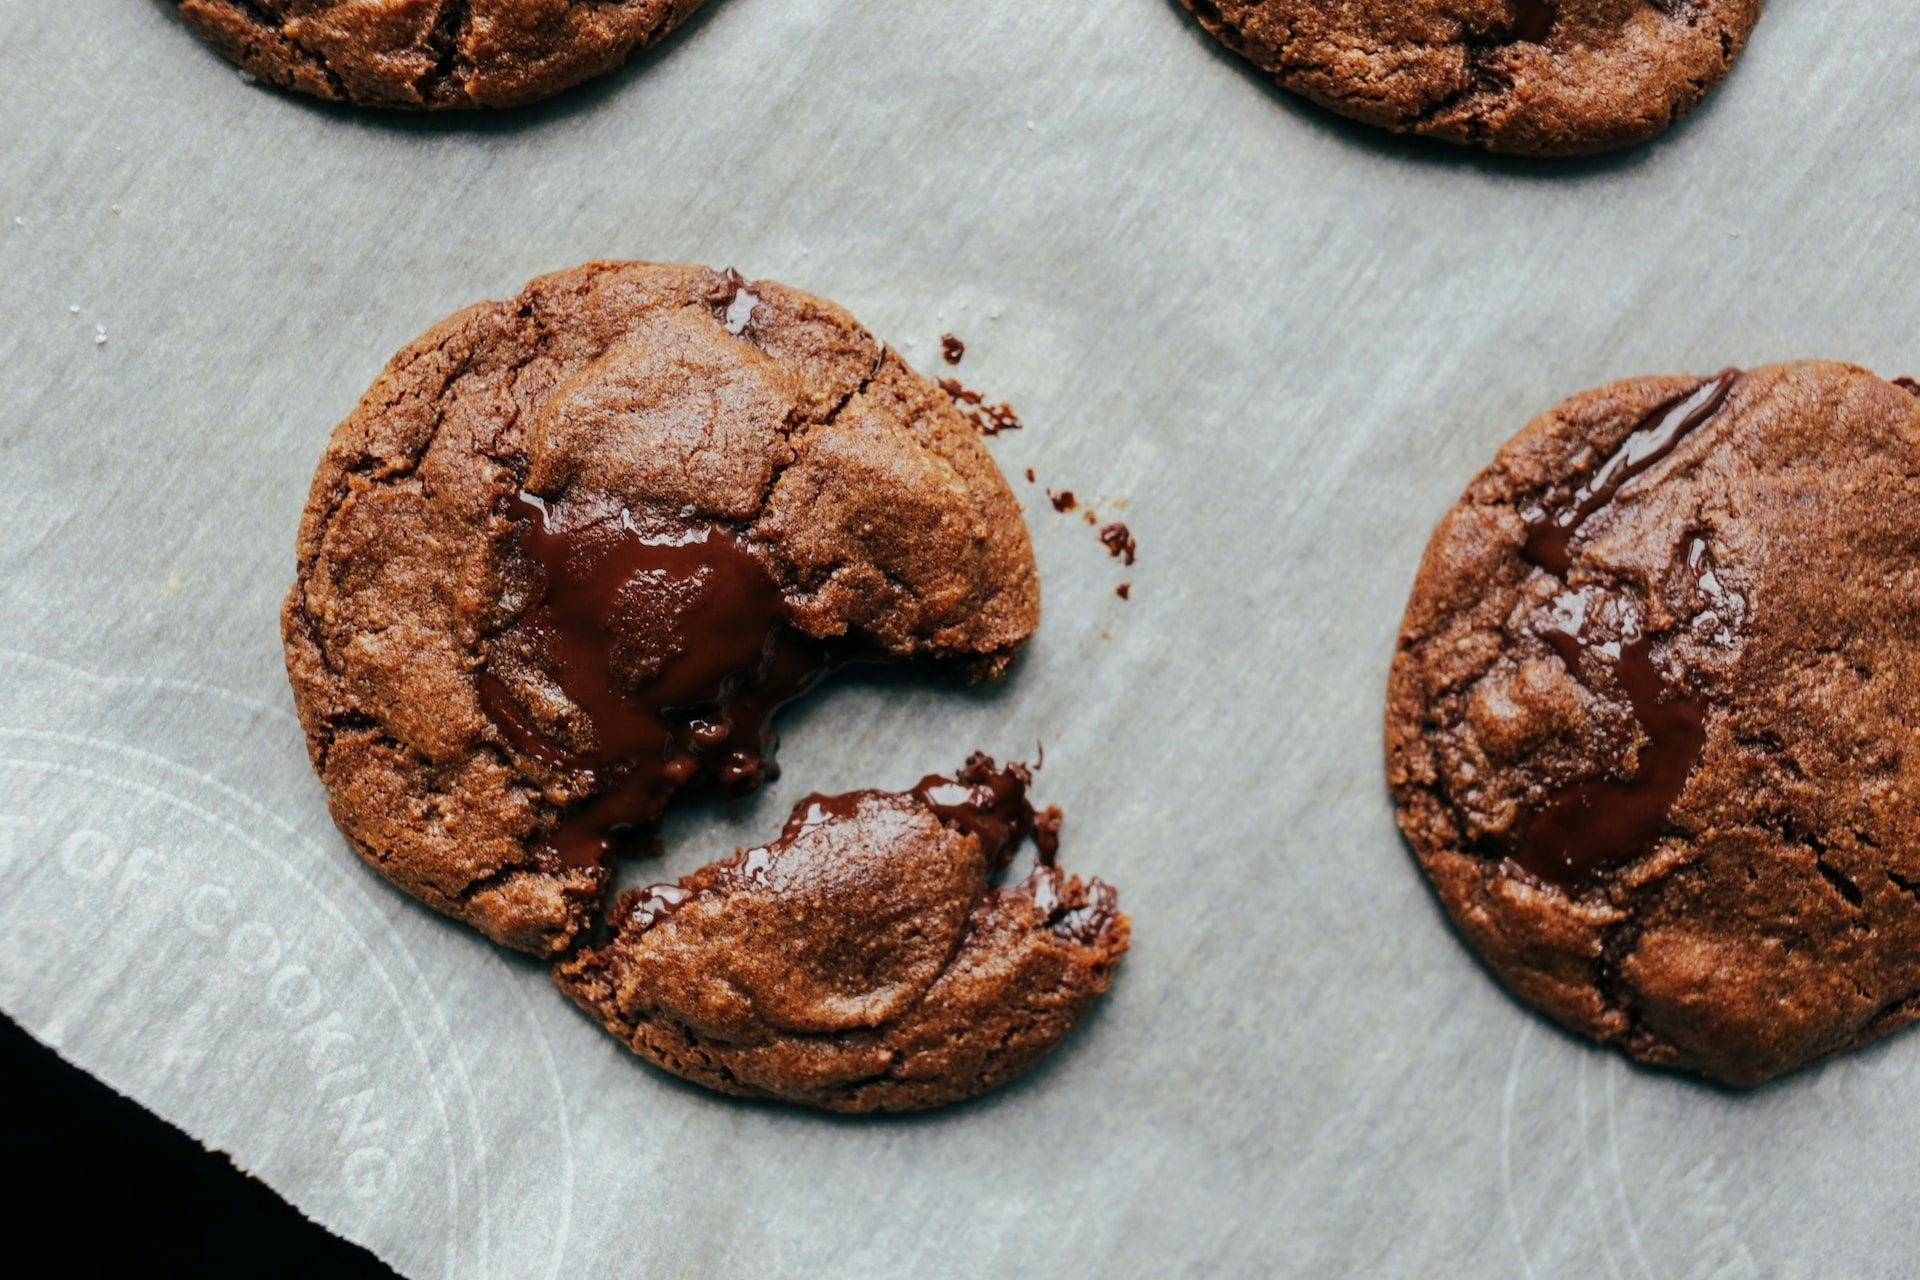 Two chocolate cookies on a tray